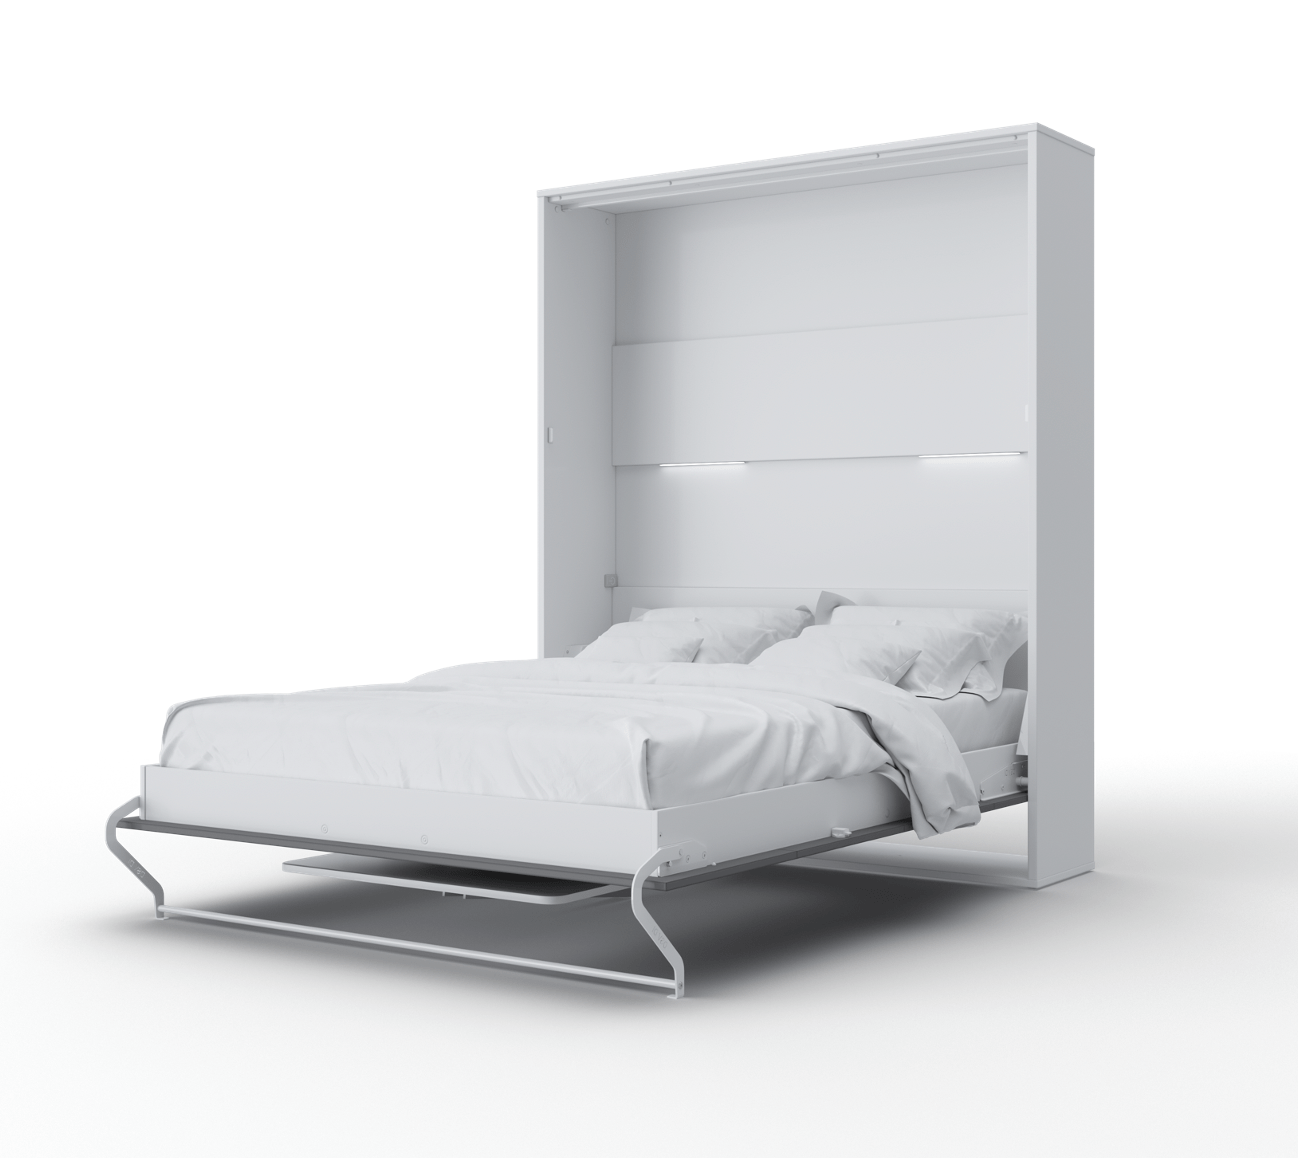 INVENTO Vertical European Queen Wall bed with Desk and LED